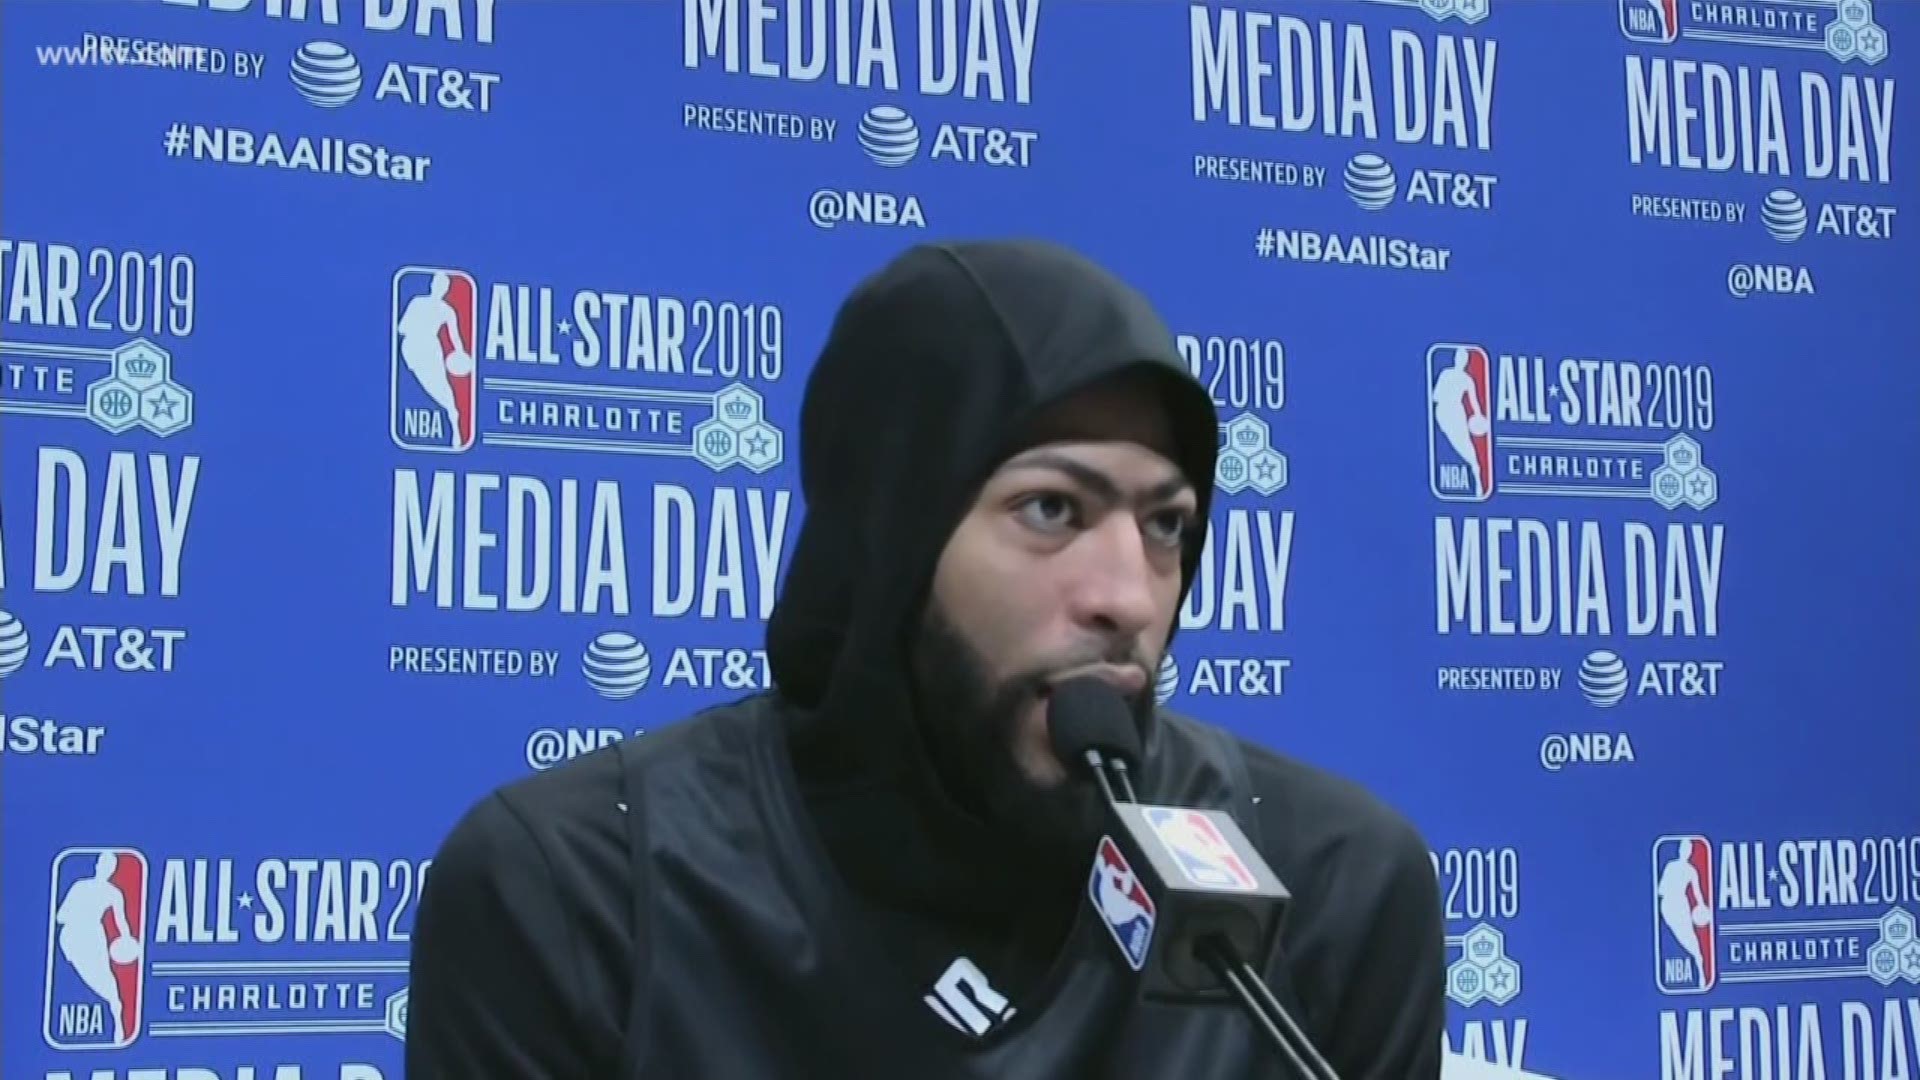 The Pelicans star left fans a little confused during his All-star game media availability Saturday in Charlotte.